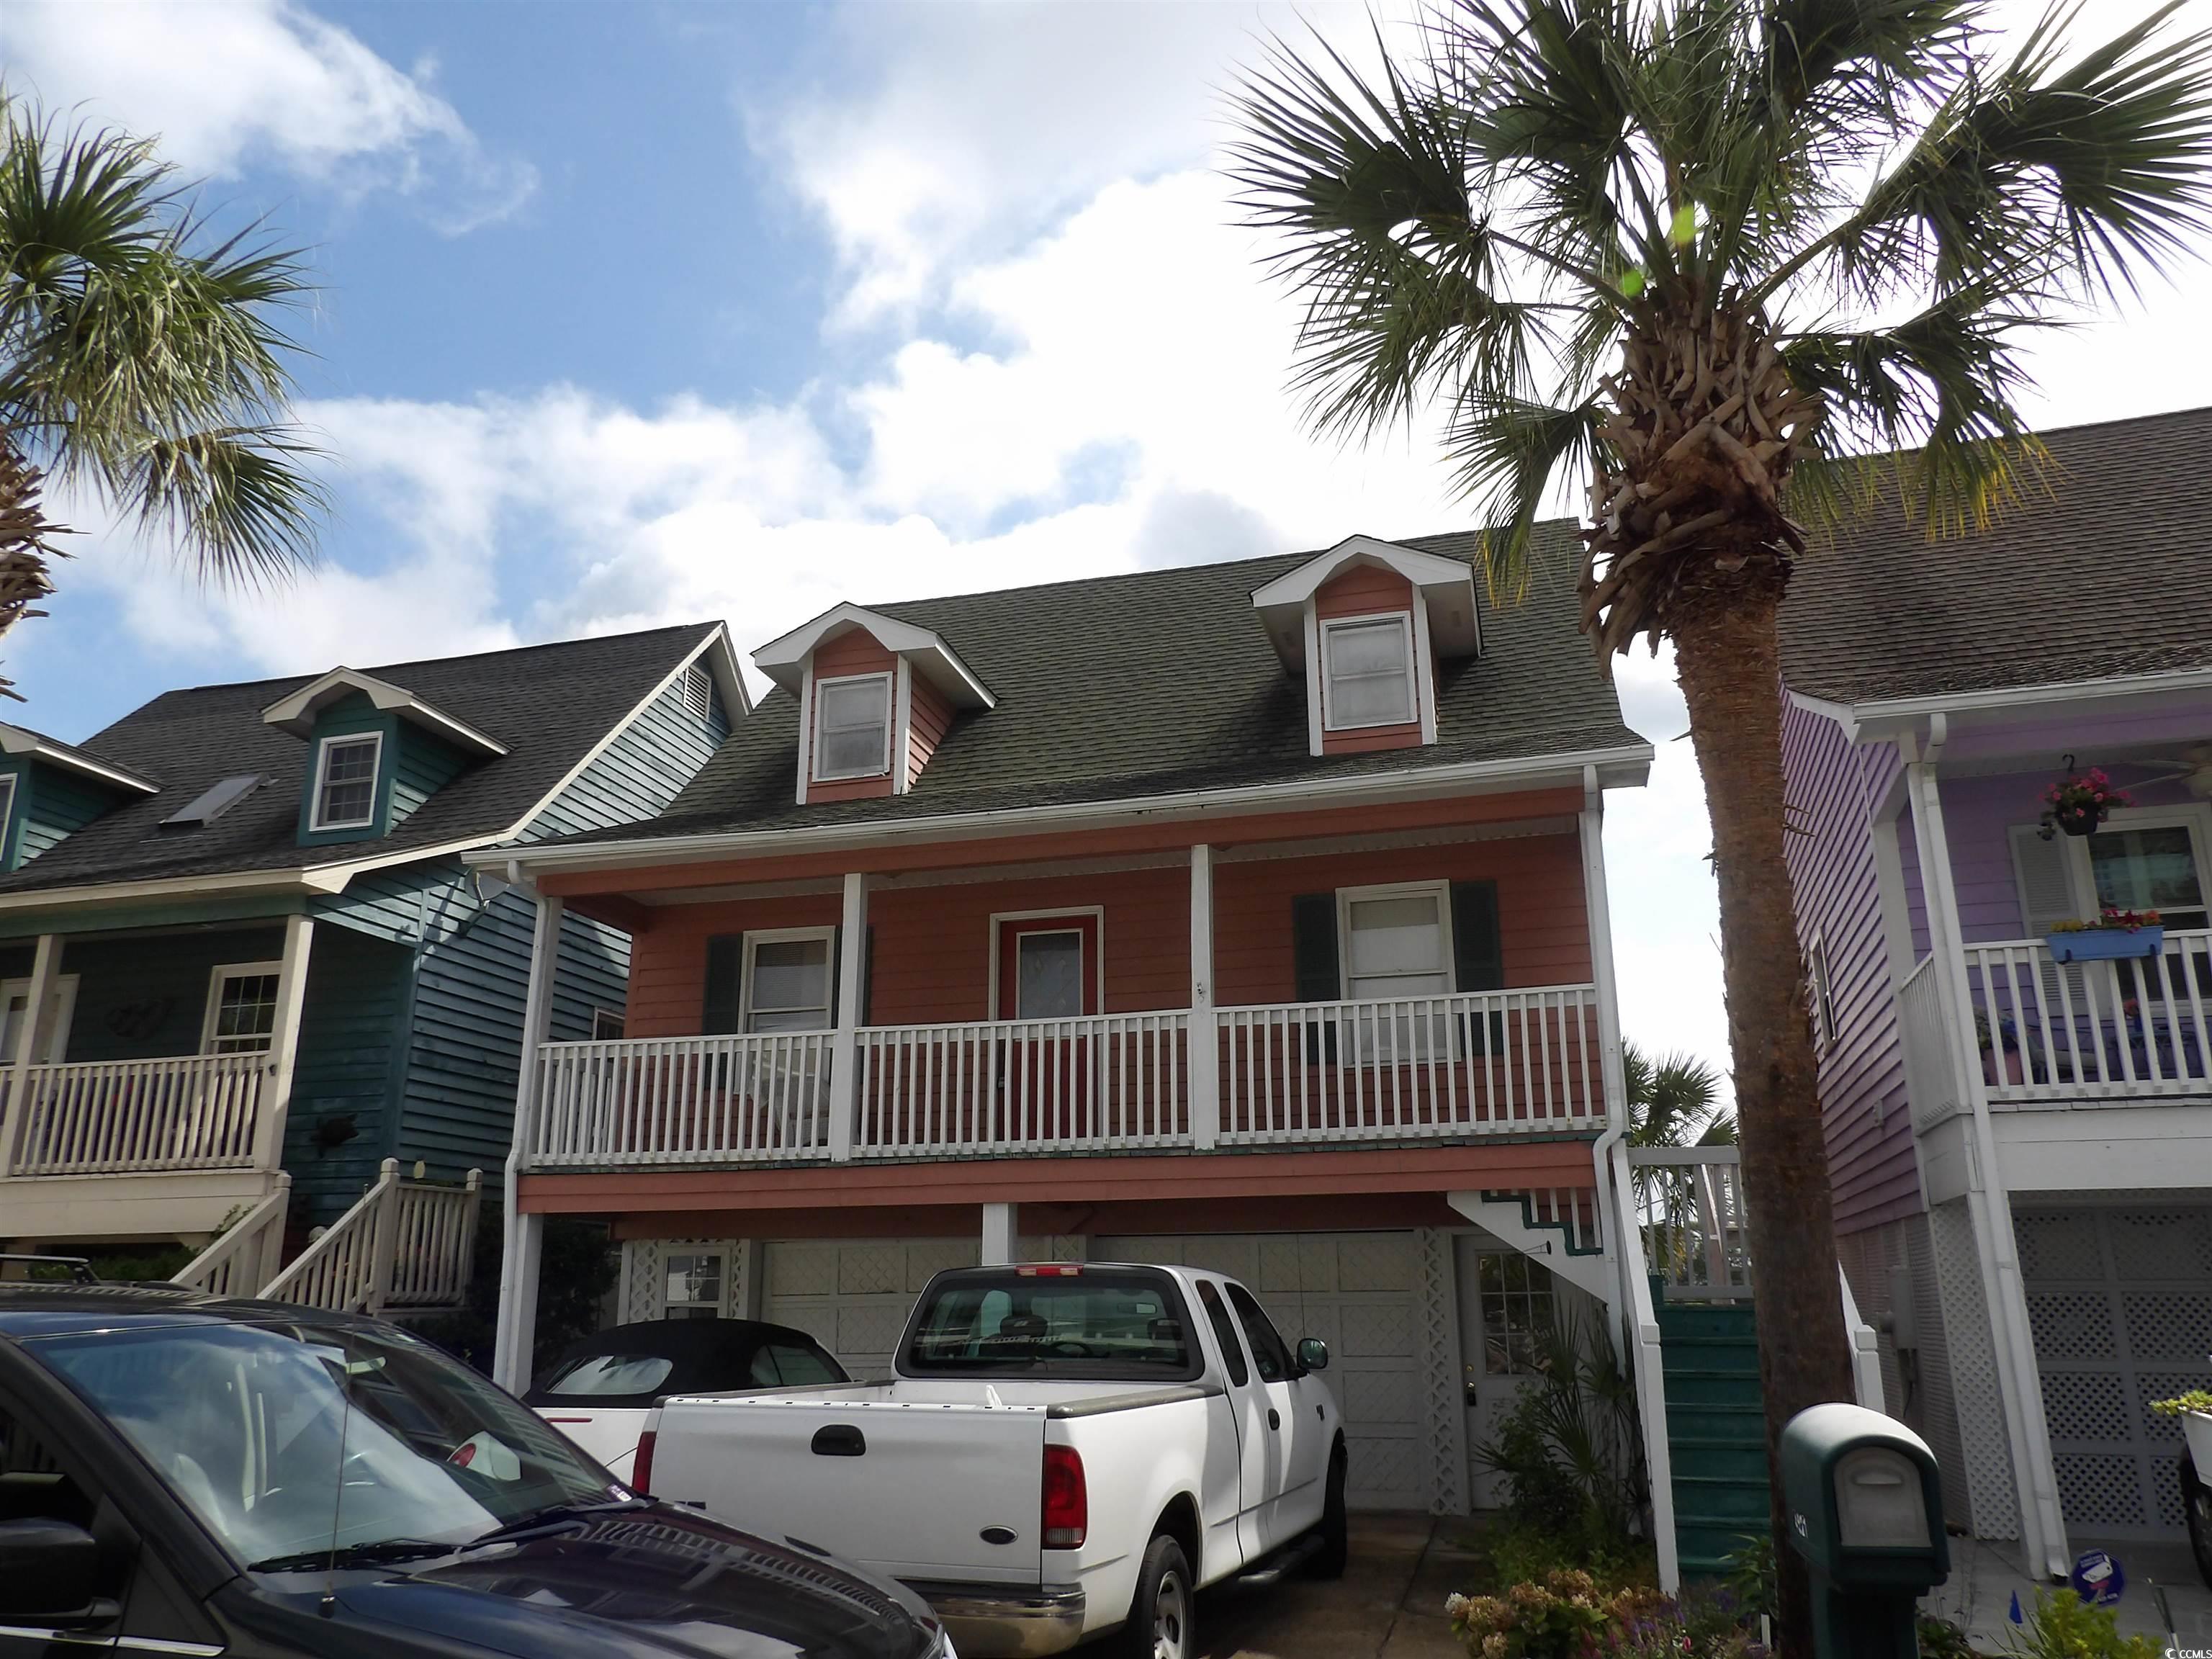 located in crystal pointe, an intracoastal waterway gated community.   dock and boat ramp.  sit on all 3 decks and see the wonderful views of the intracoastal.  garage has flooded in the past and has some water damage in house.  beautiful location.